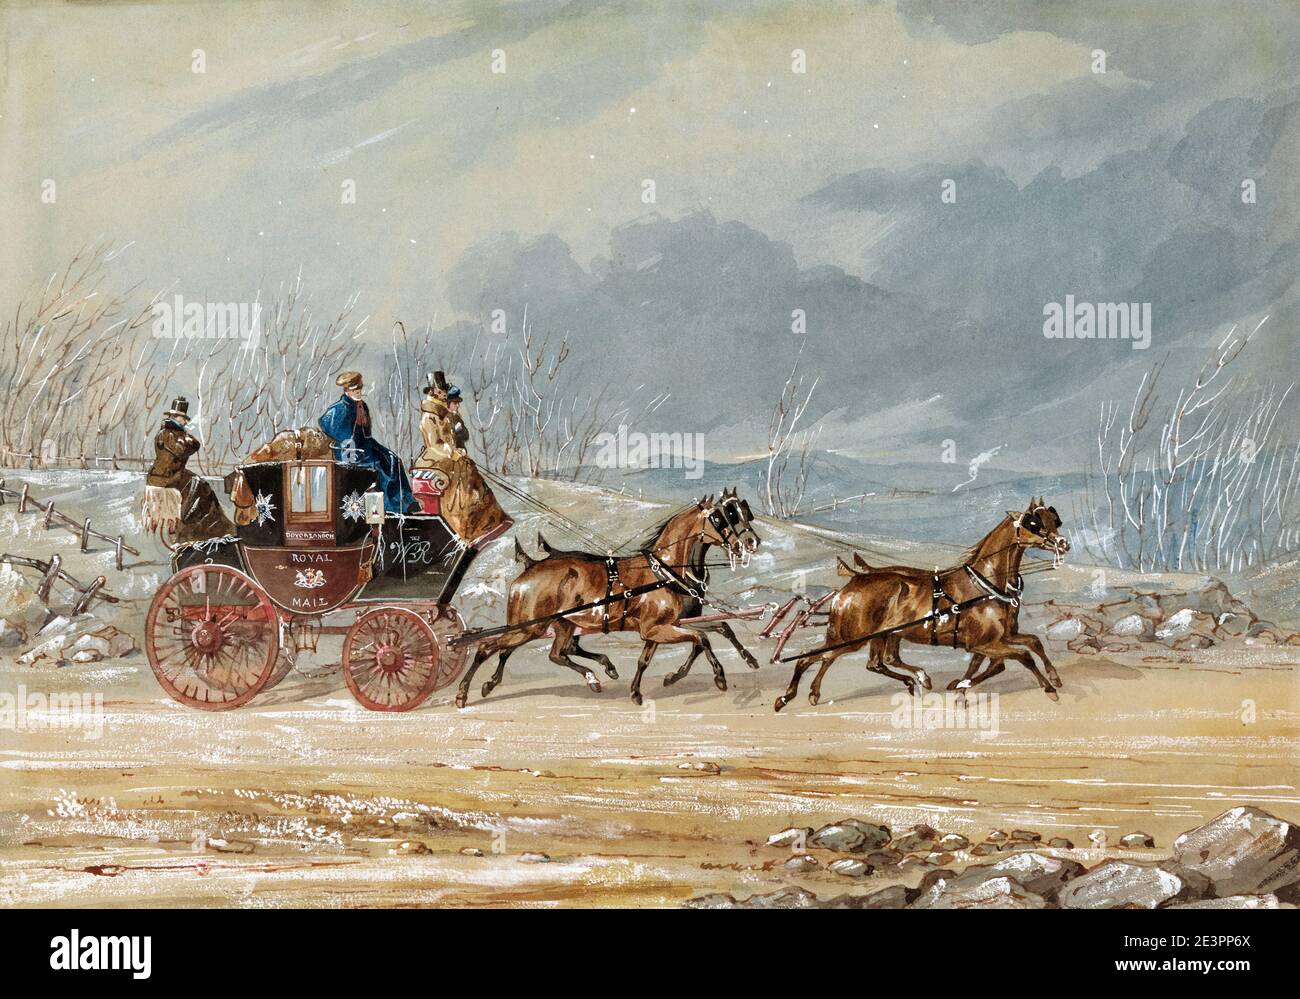 Charles B. Newhouse, der London-Dover Royal Mail Coach und Pferde, Malerei, 1830-1840 Stockfoto